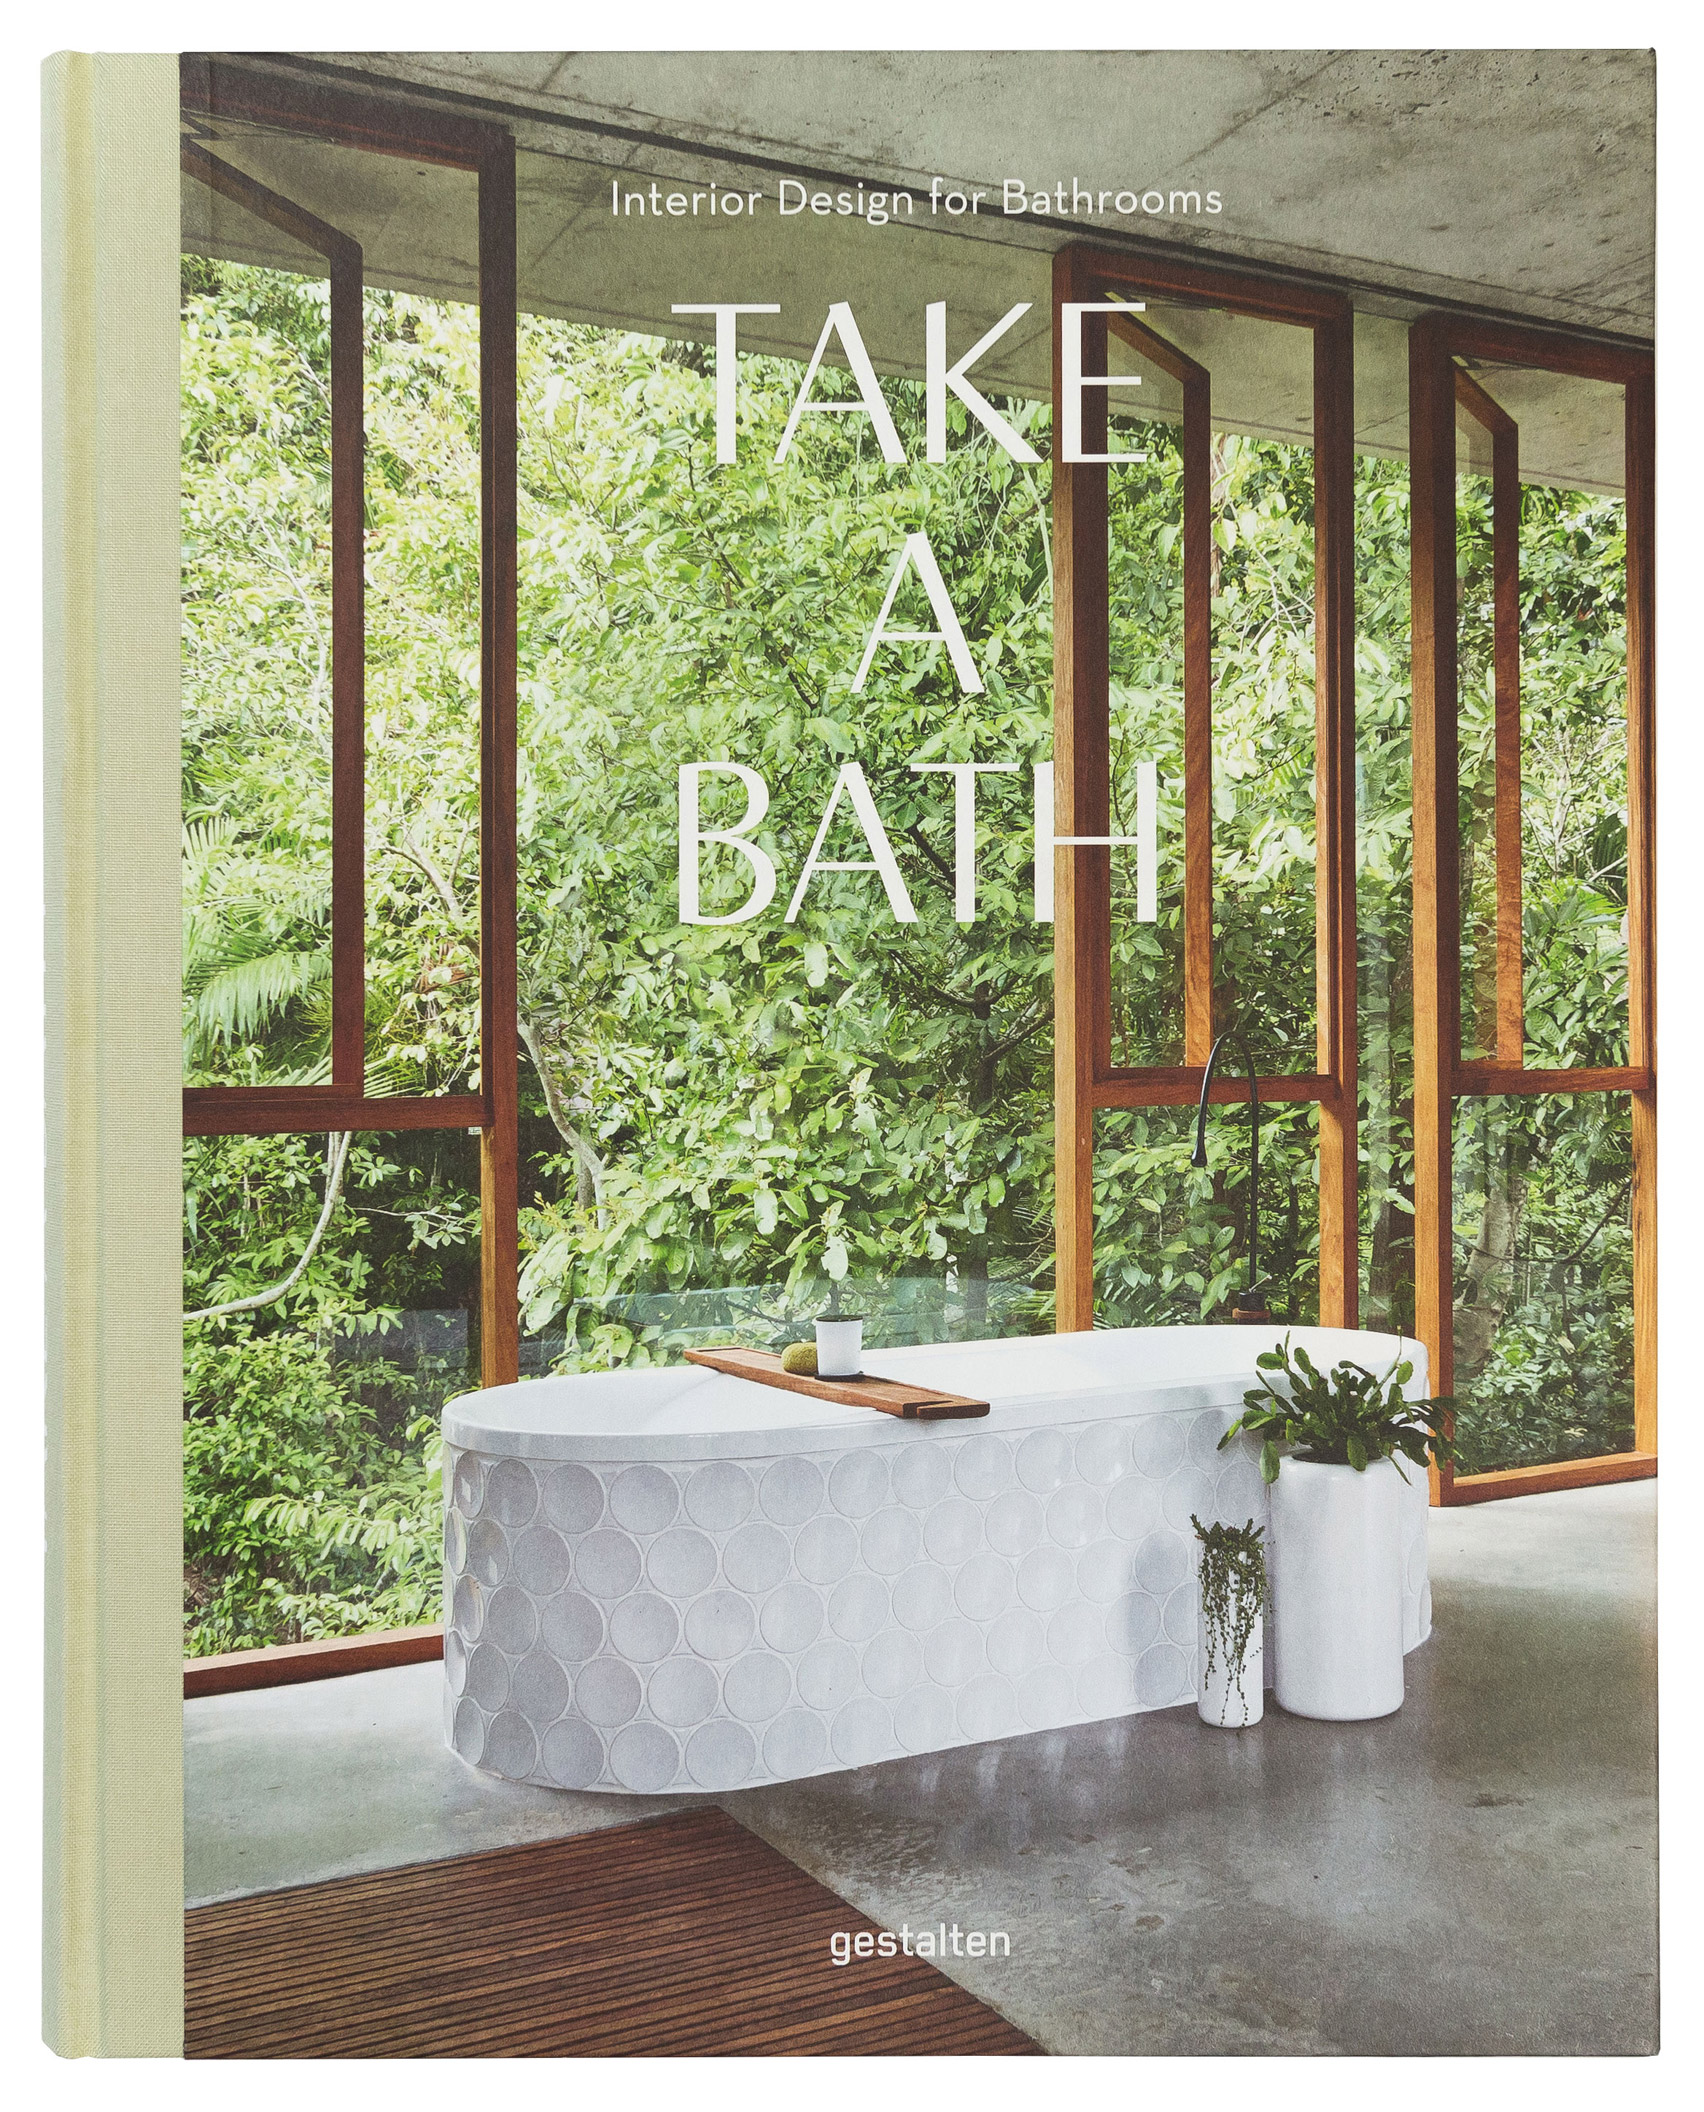 Competition: win a book documenting contemporary bathroom interiors